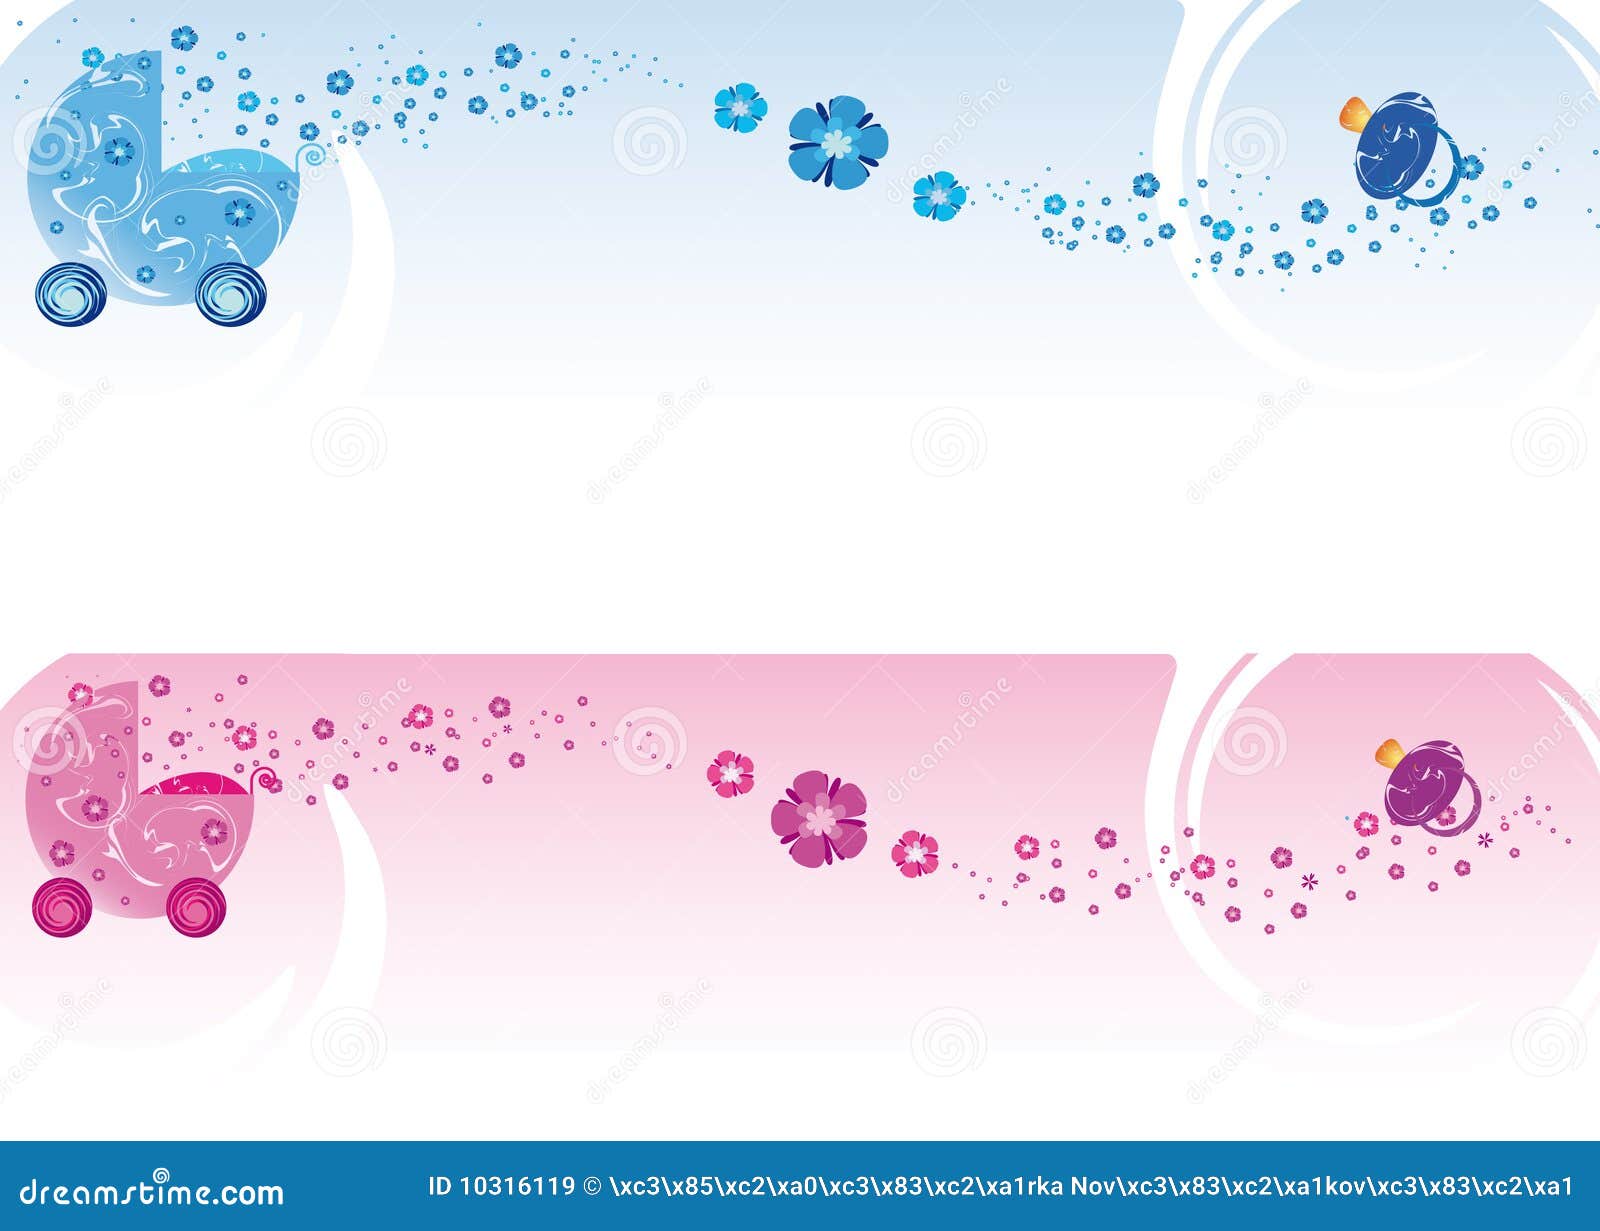 free baby shower banner clipart - photo #17